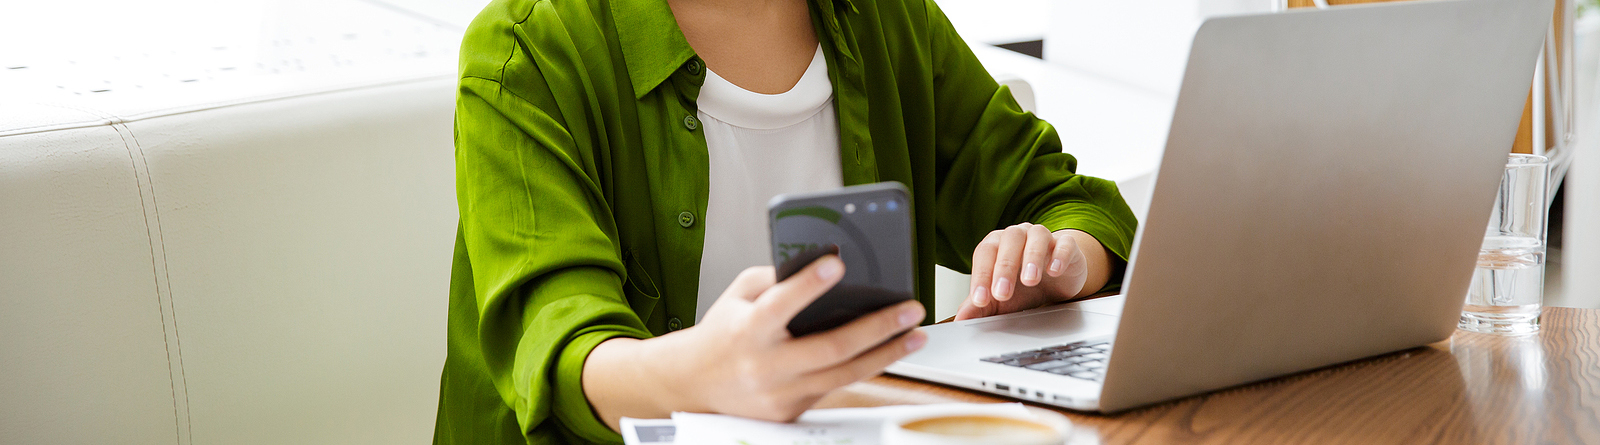 Woman in a green shirt holding a cell phone and using her laptop